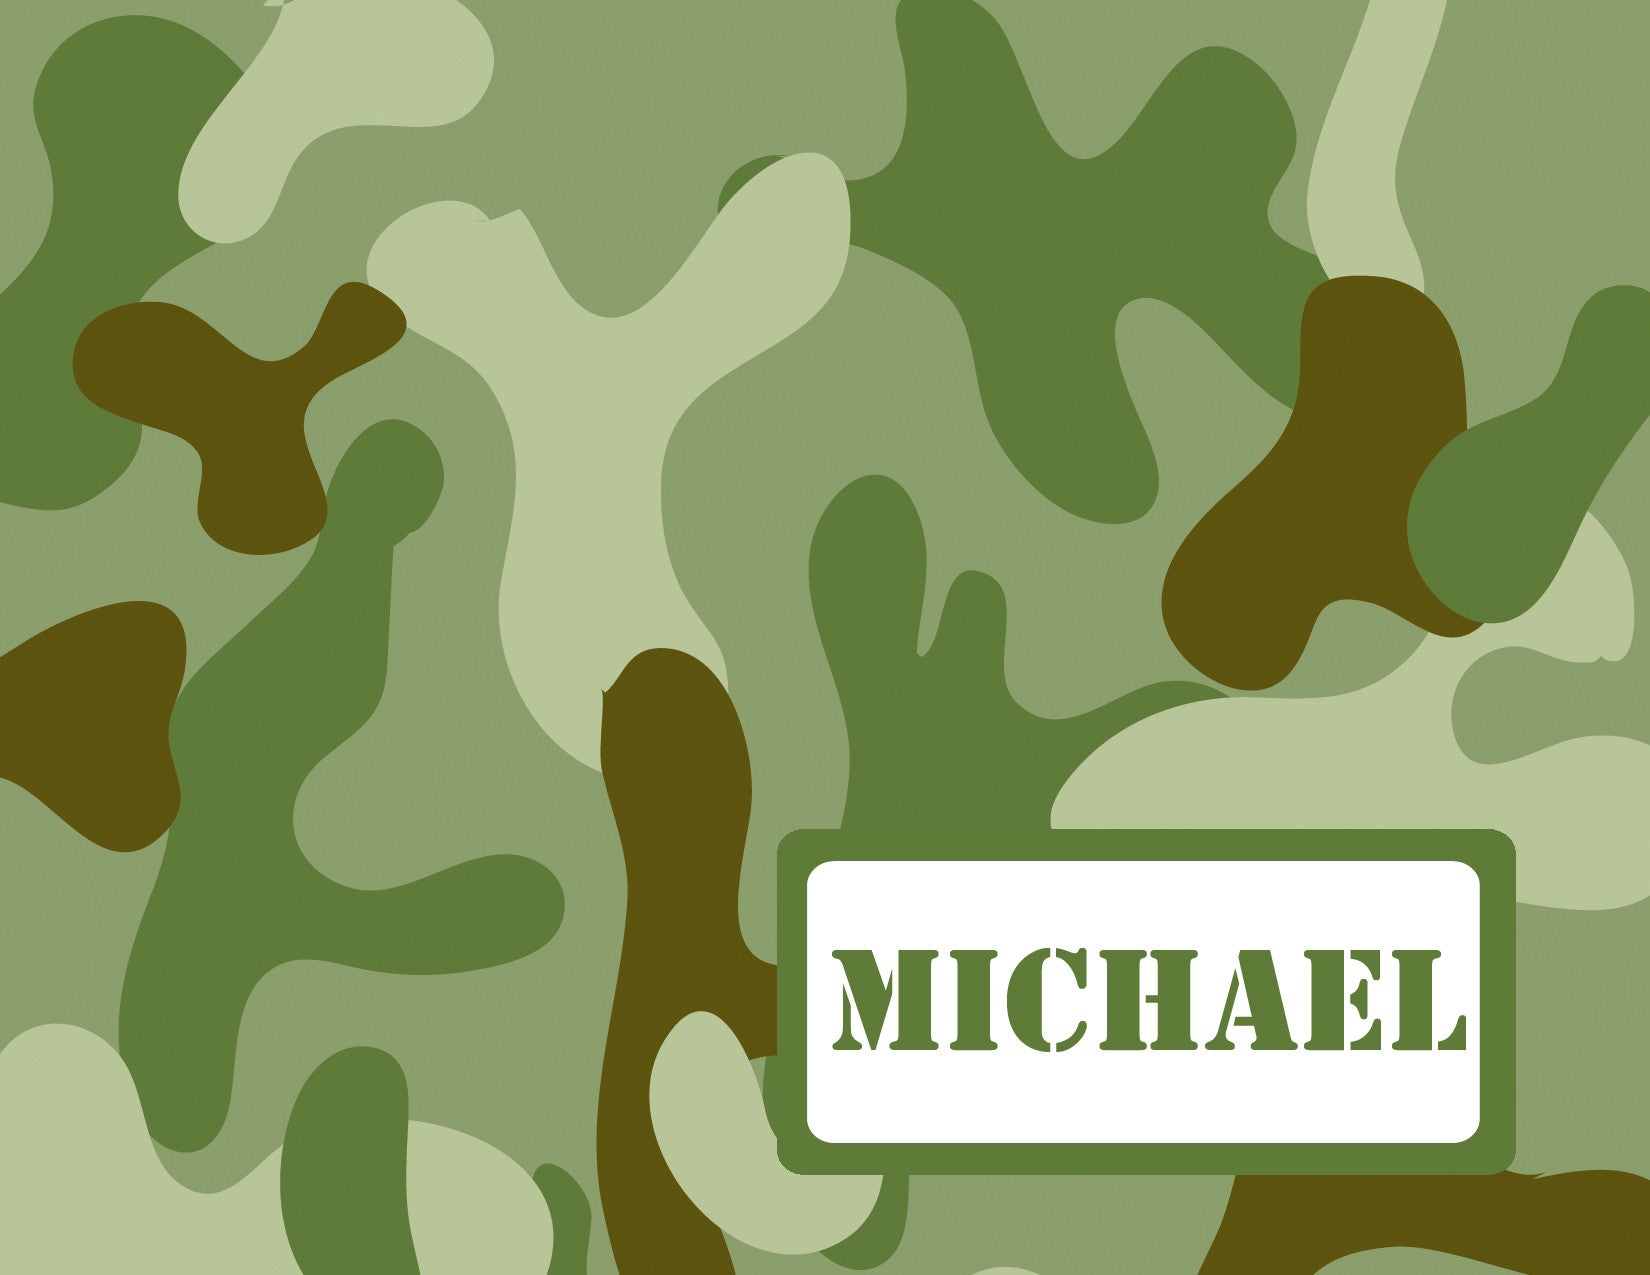 Army/ military camouflage